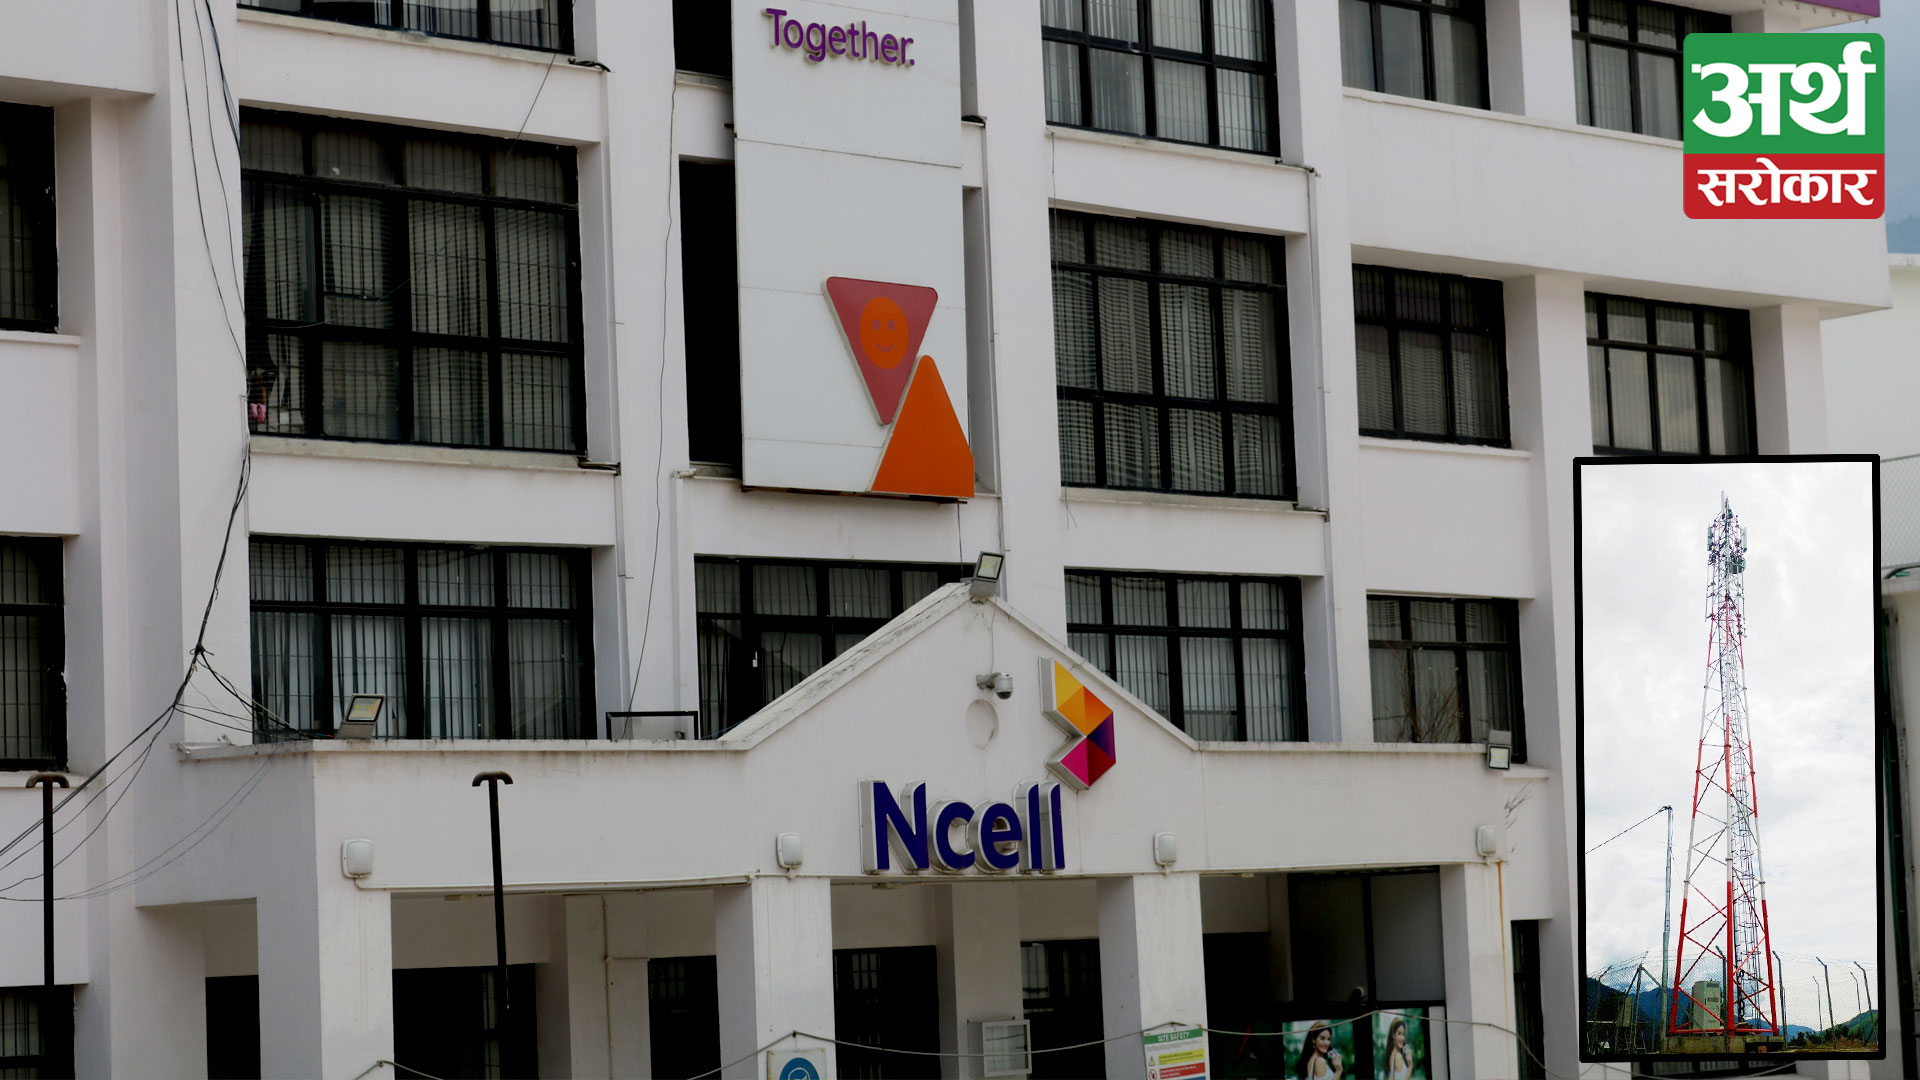 Ncell expands 4G in remote Jumla, Locals benefiting from 4G connectivity